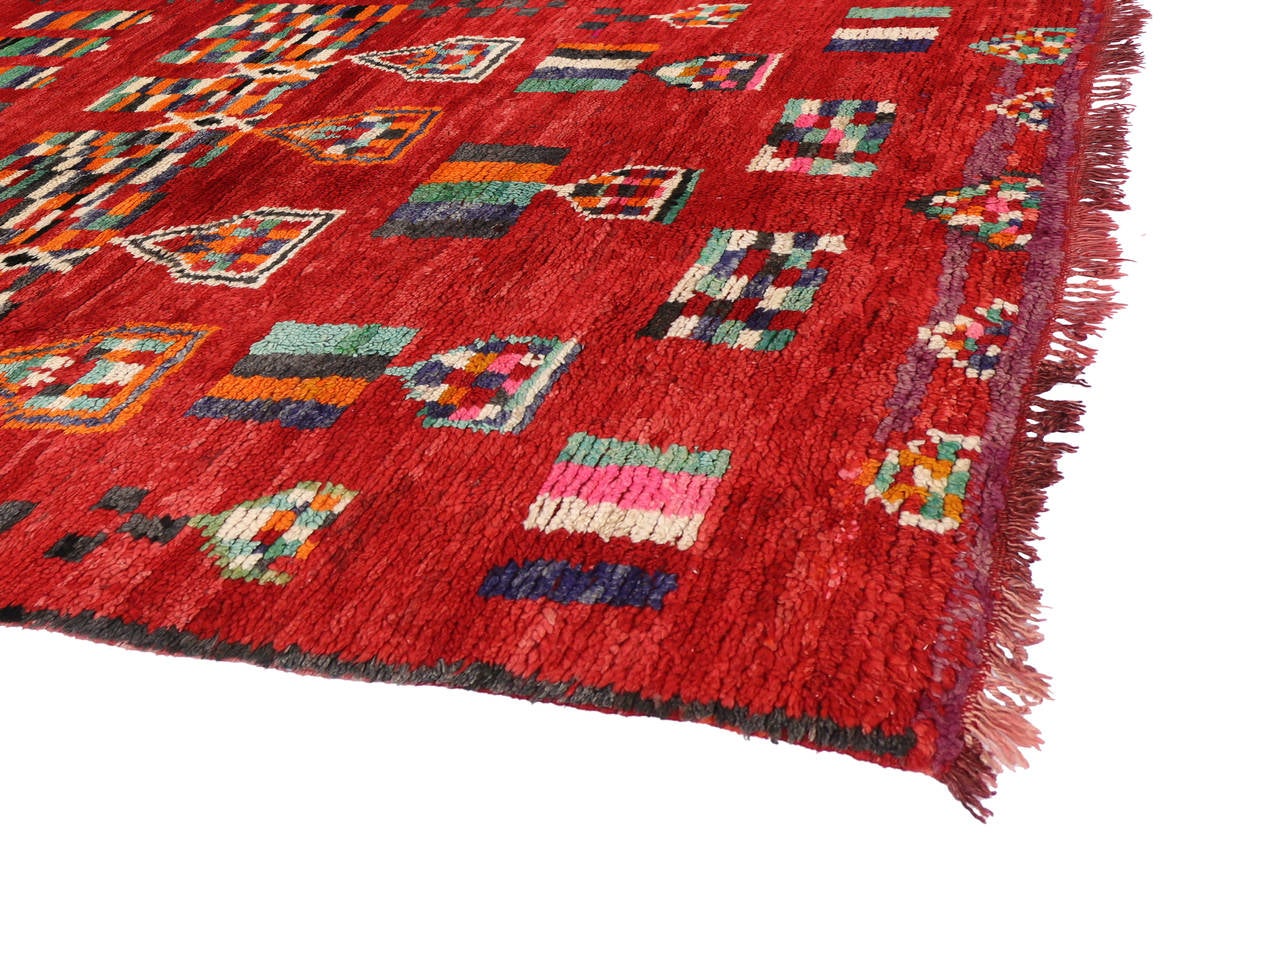 20th Century Vintage Berber Moroccan Rug with Modern Tribal Style